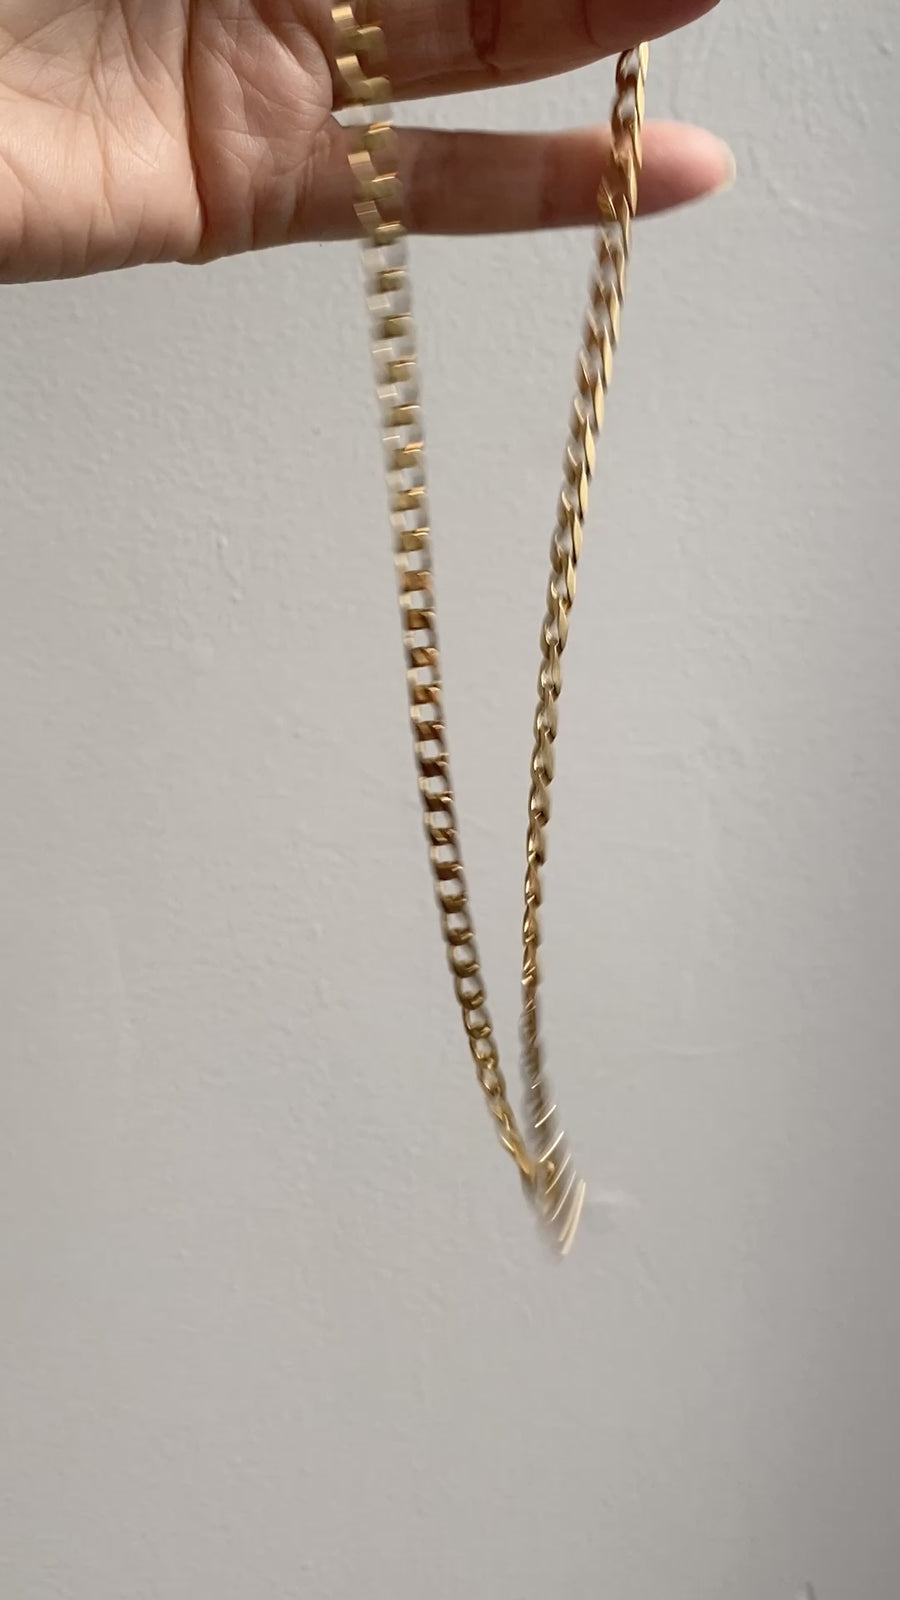 DELICIOUS! Heavy square curb link necklace in solid 18k gold - 21 inch length